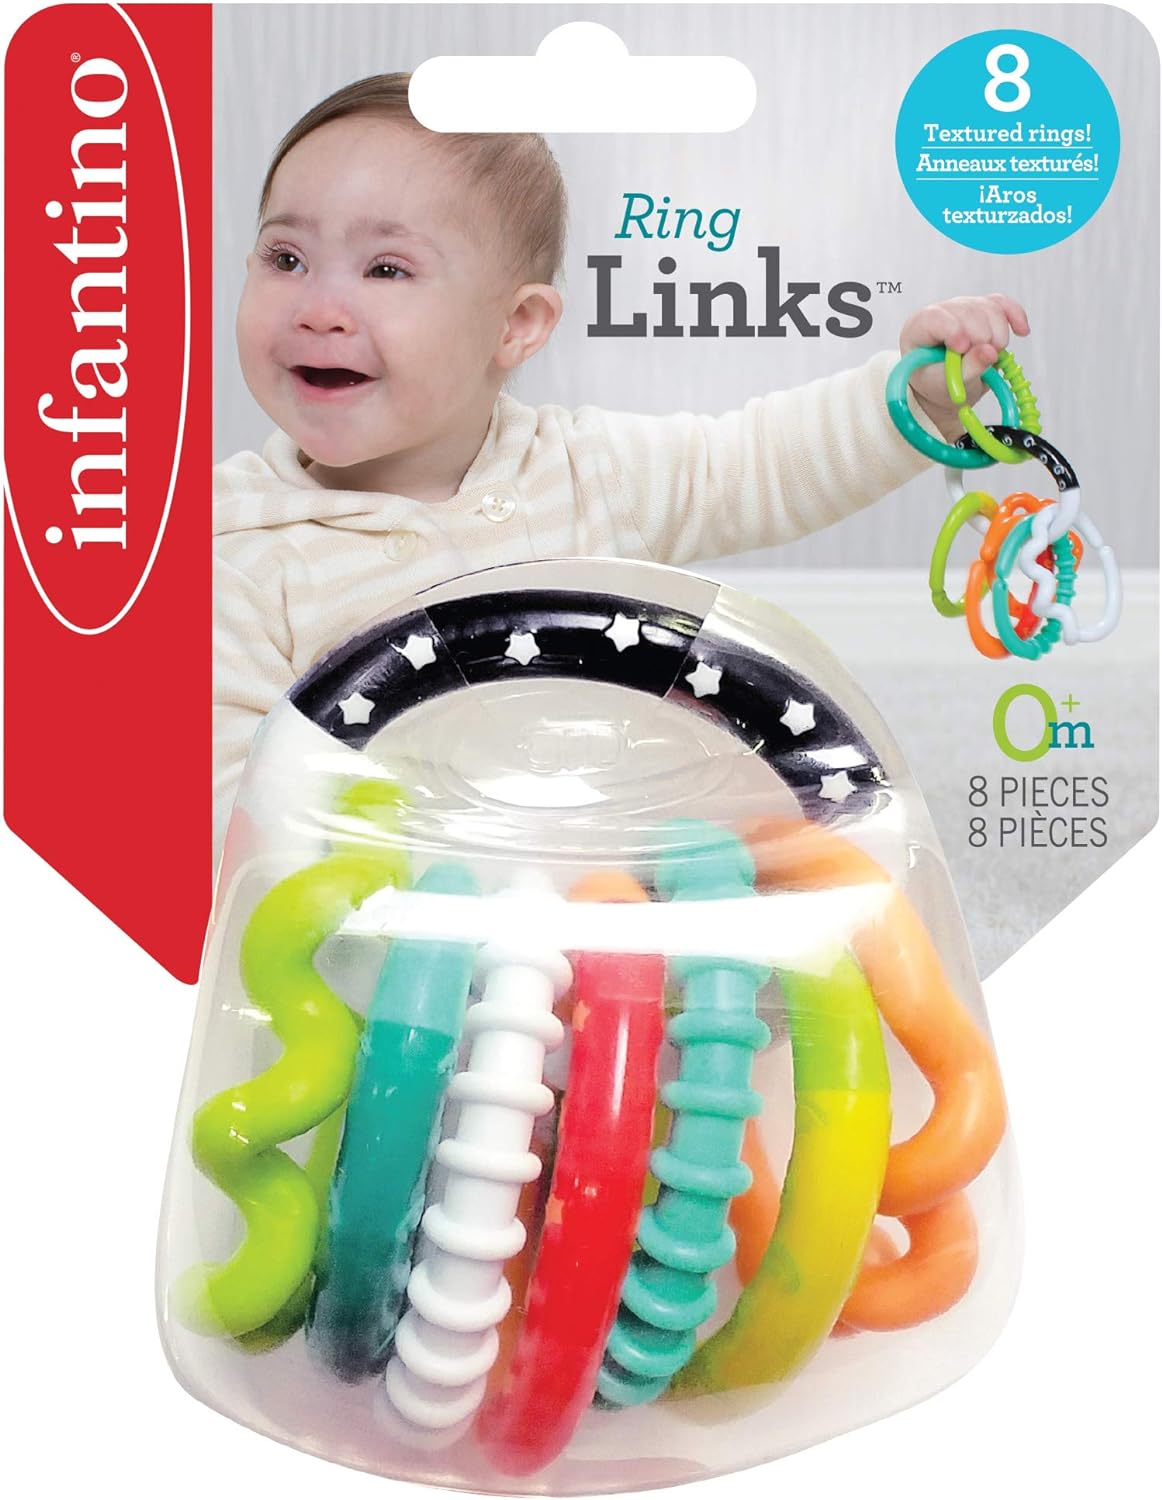 Infantino Textured Ring Links Rattle